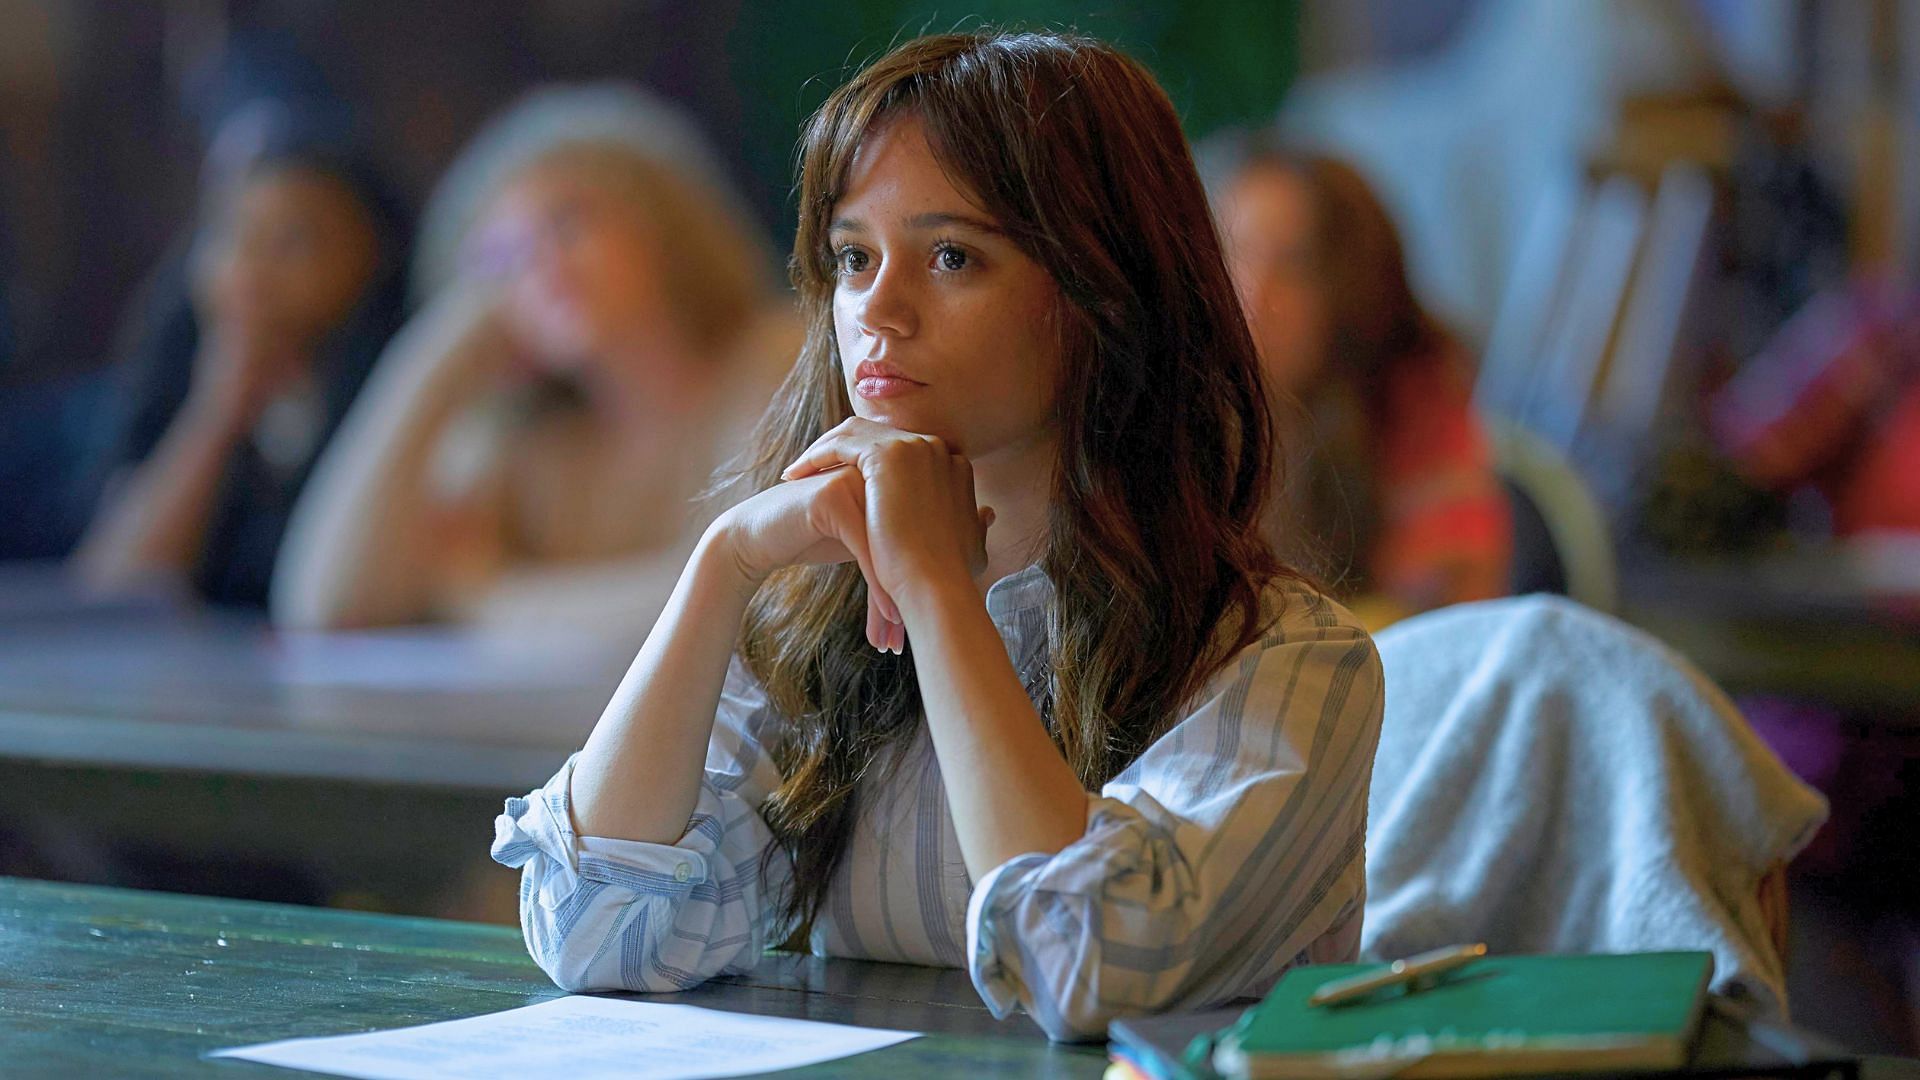 Jenna Ortega plays an 18-year-old student in Miller